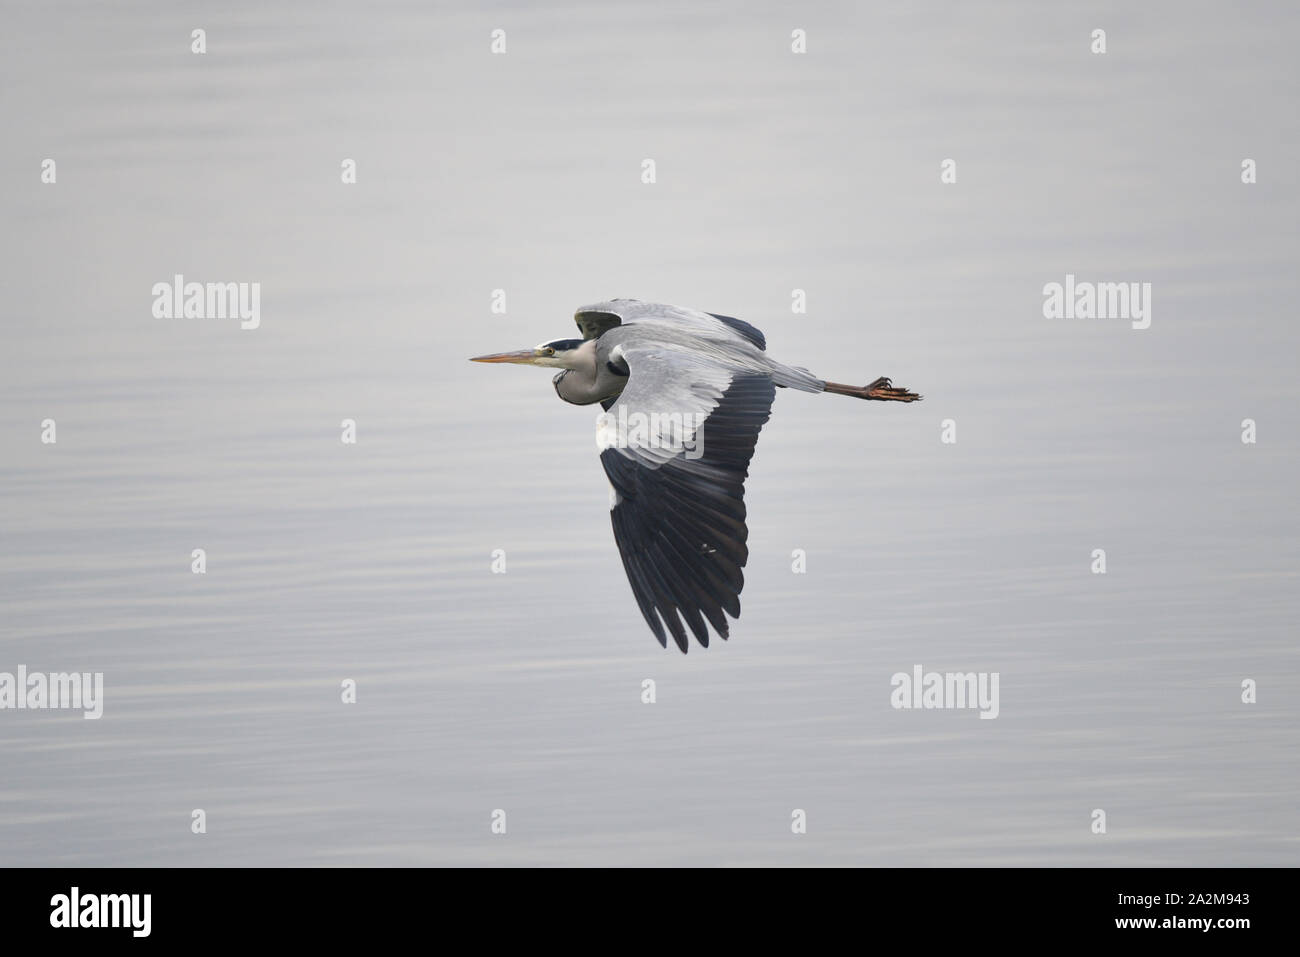 A grey heron flying above the water Stock Photo